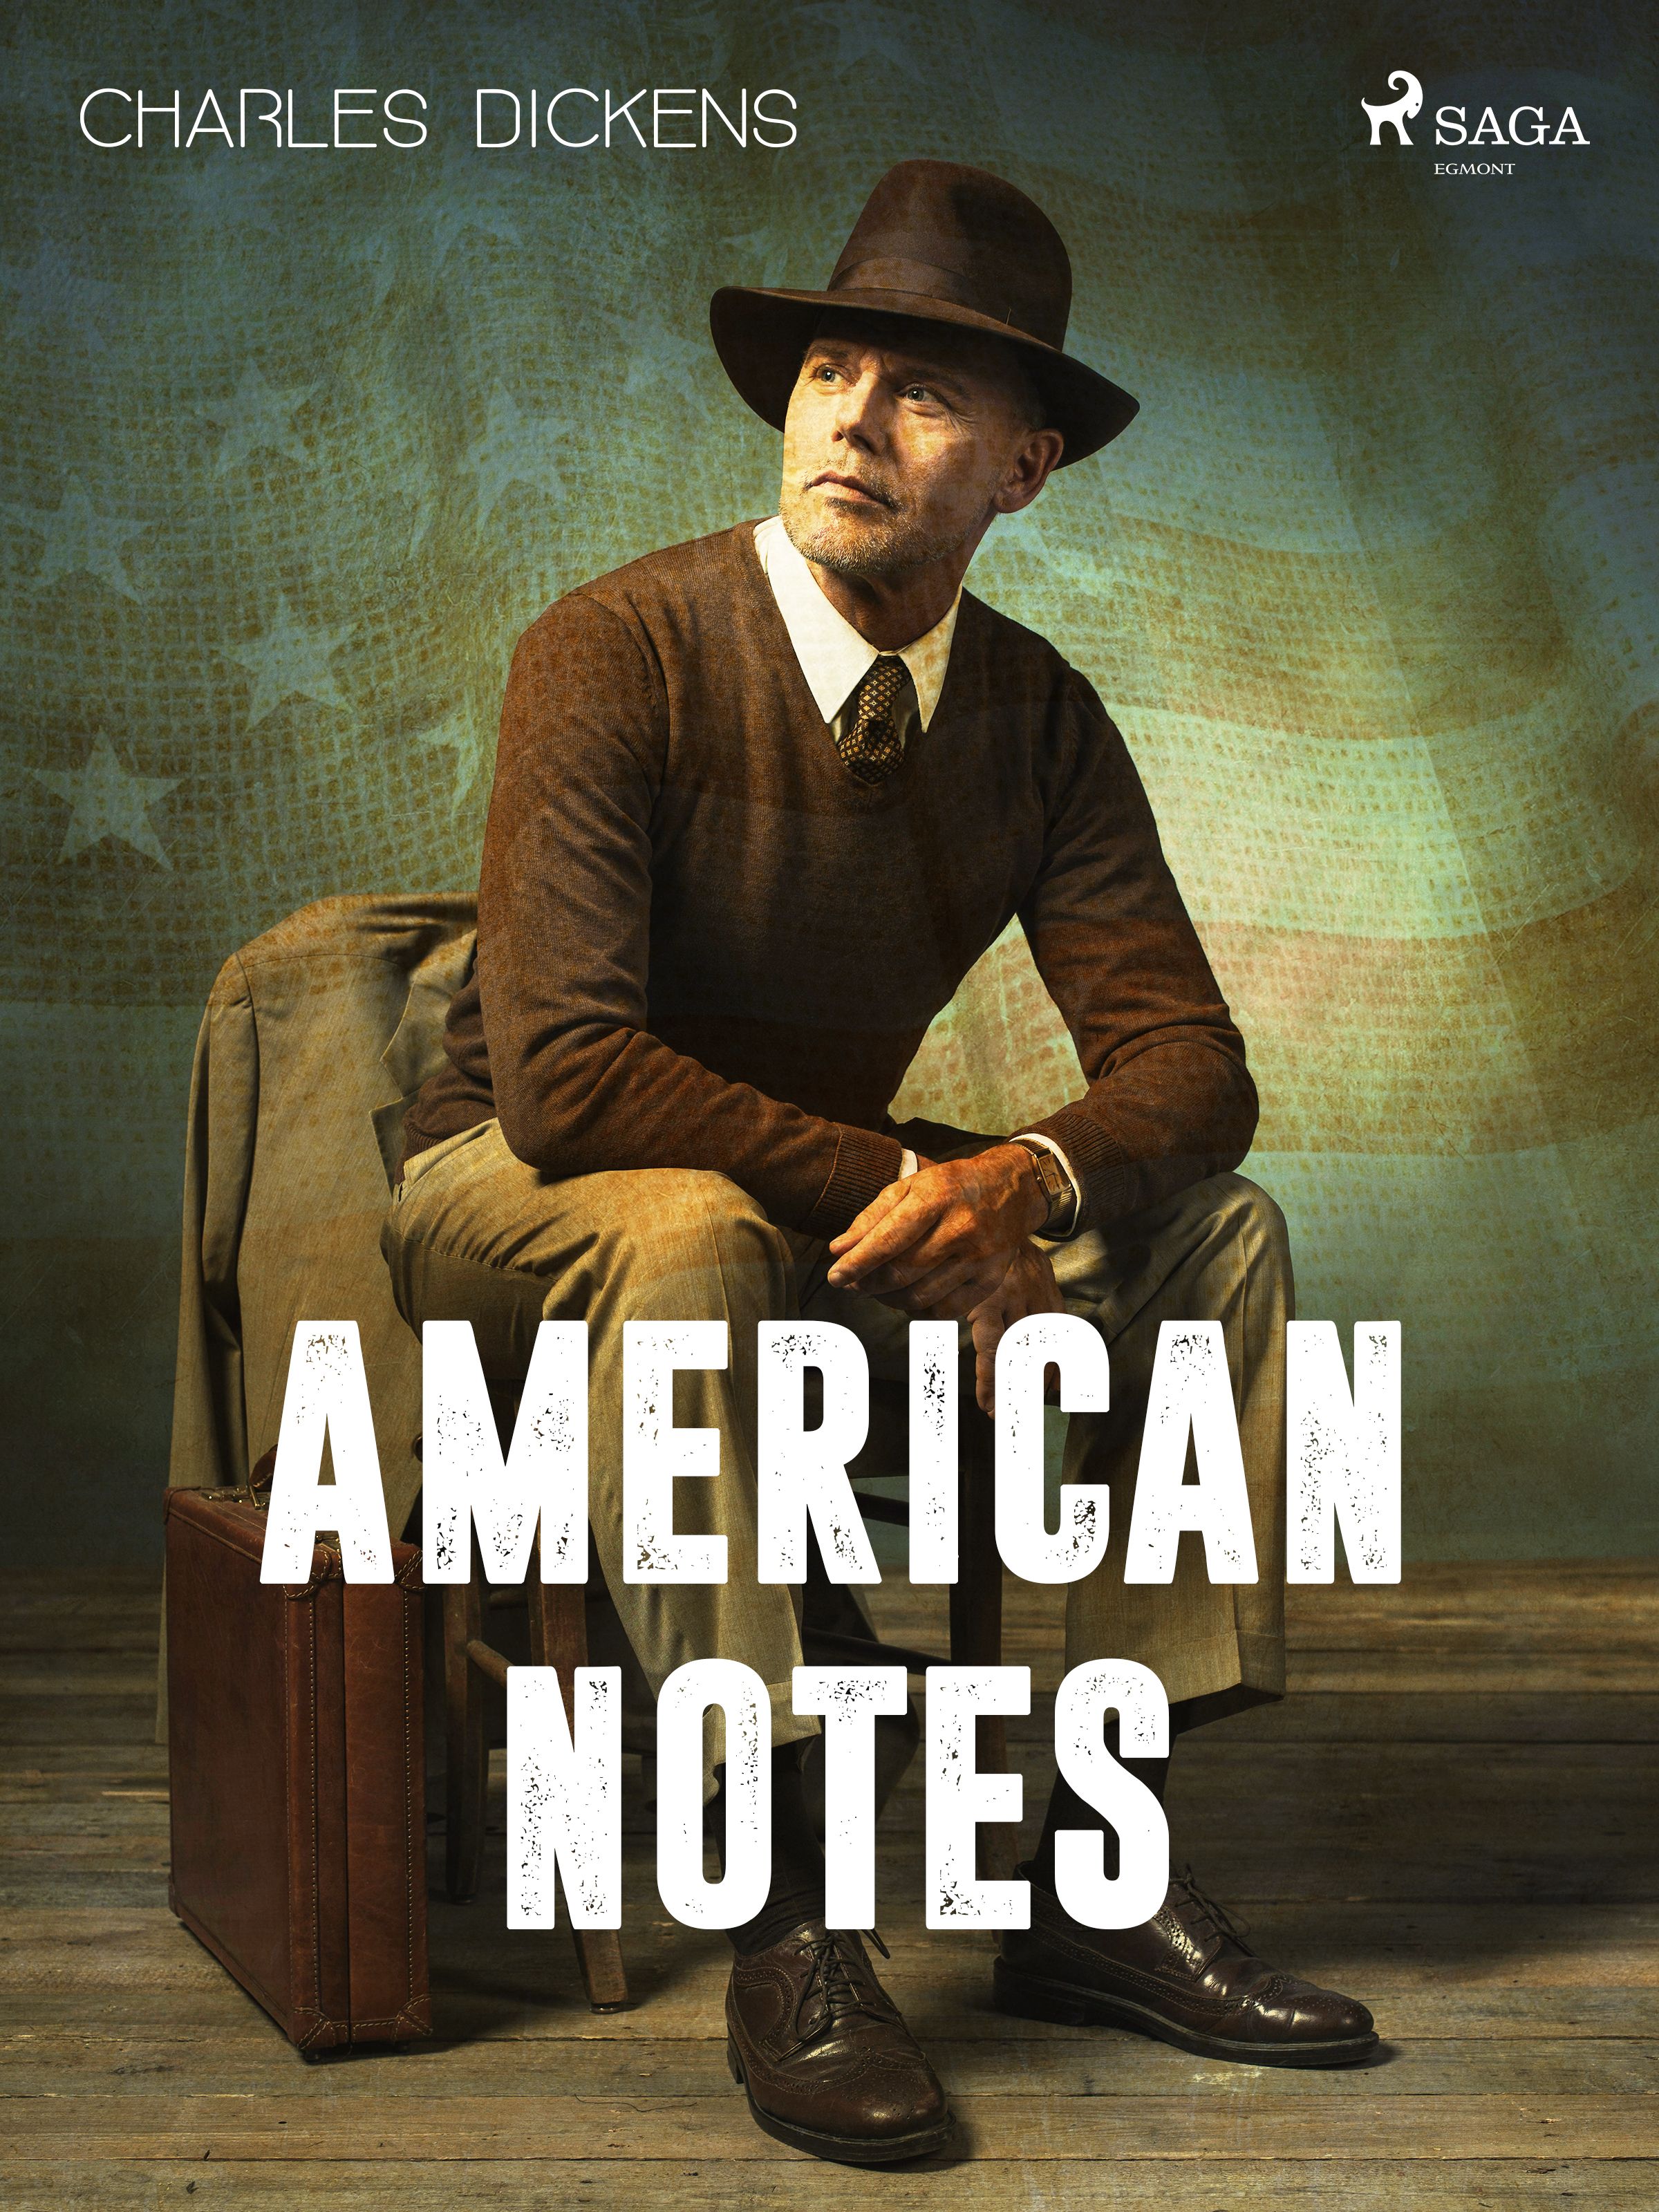 American Notes, eBook by Charles Dickens